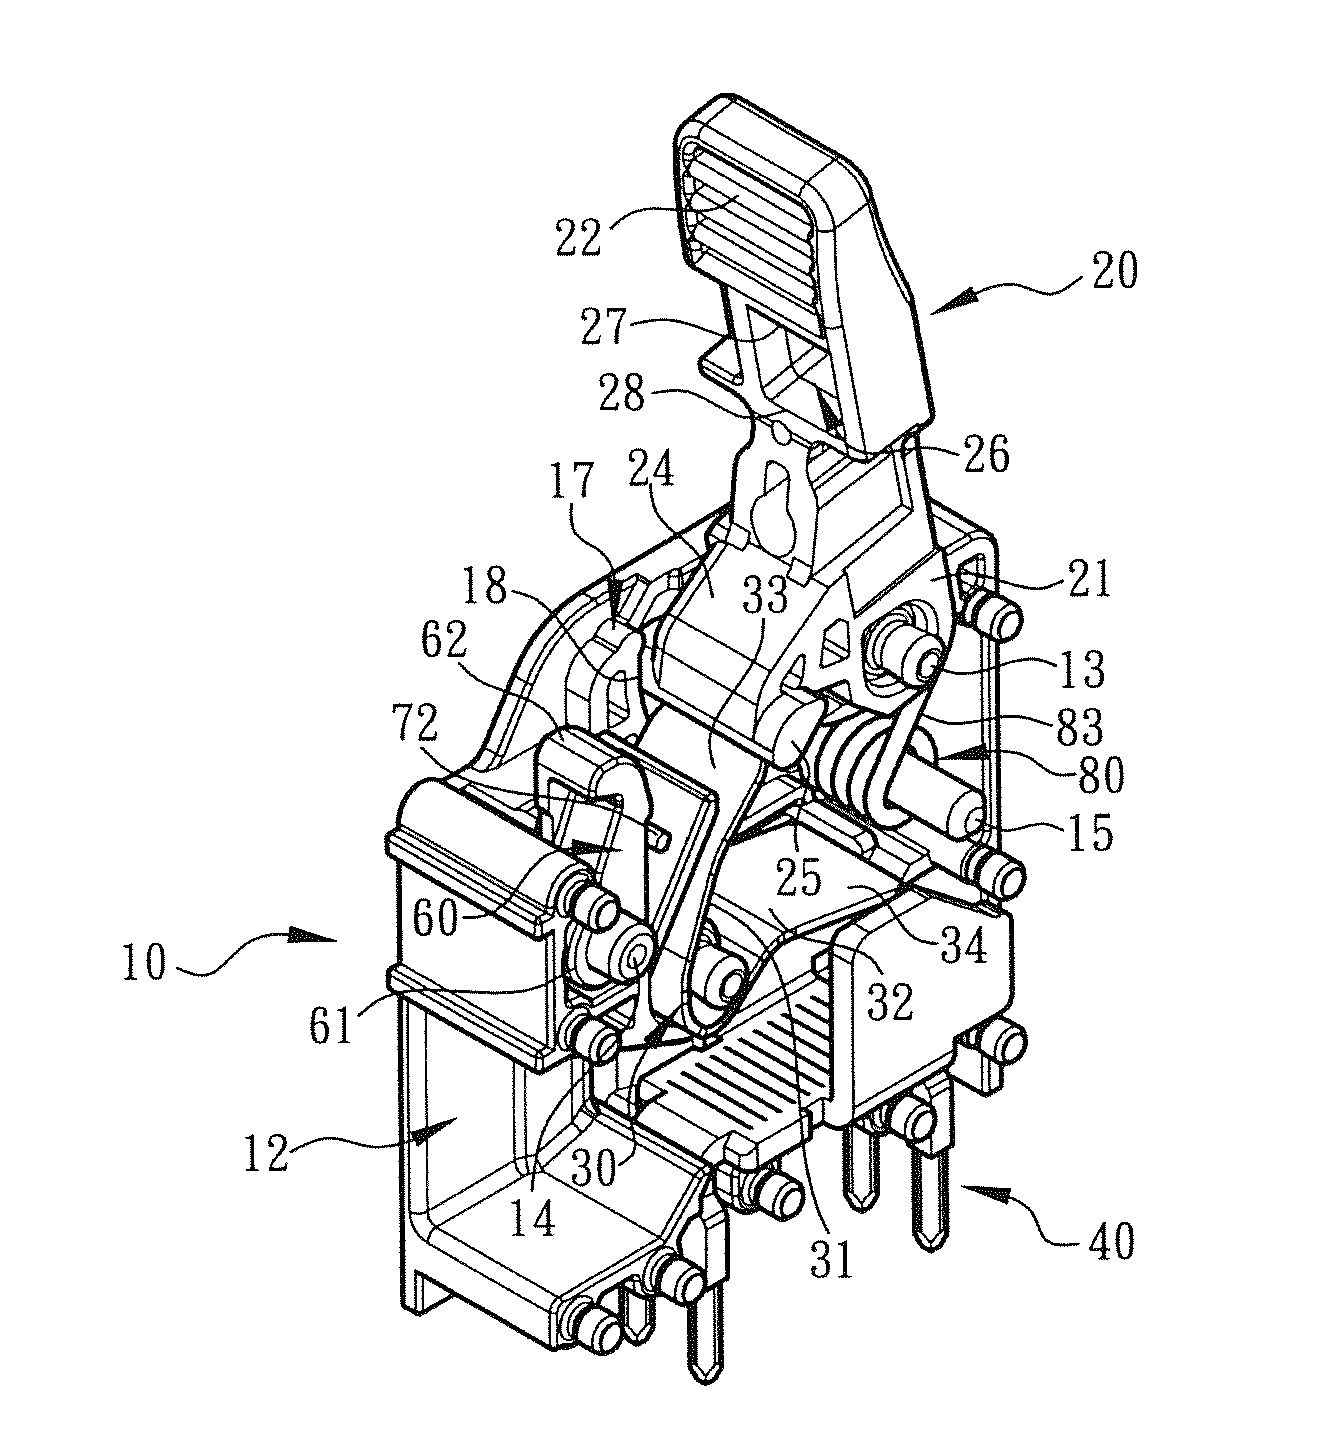 Electrical connection terminal structure